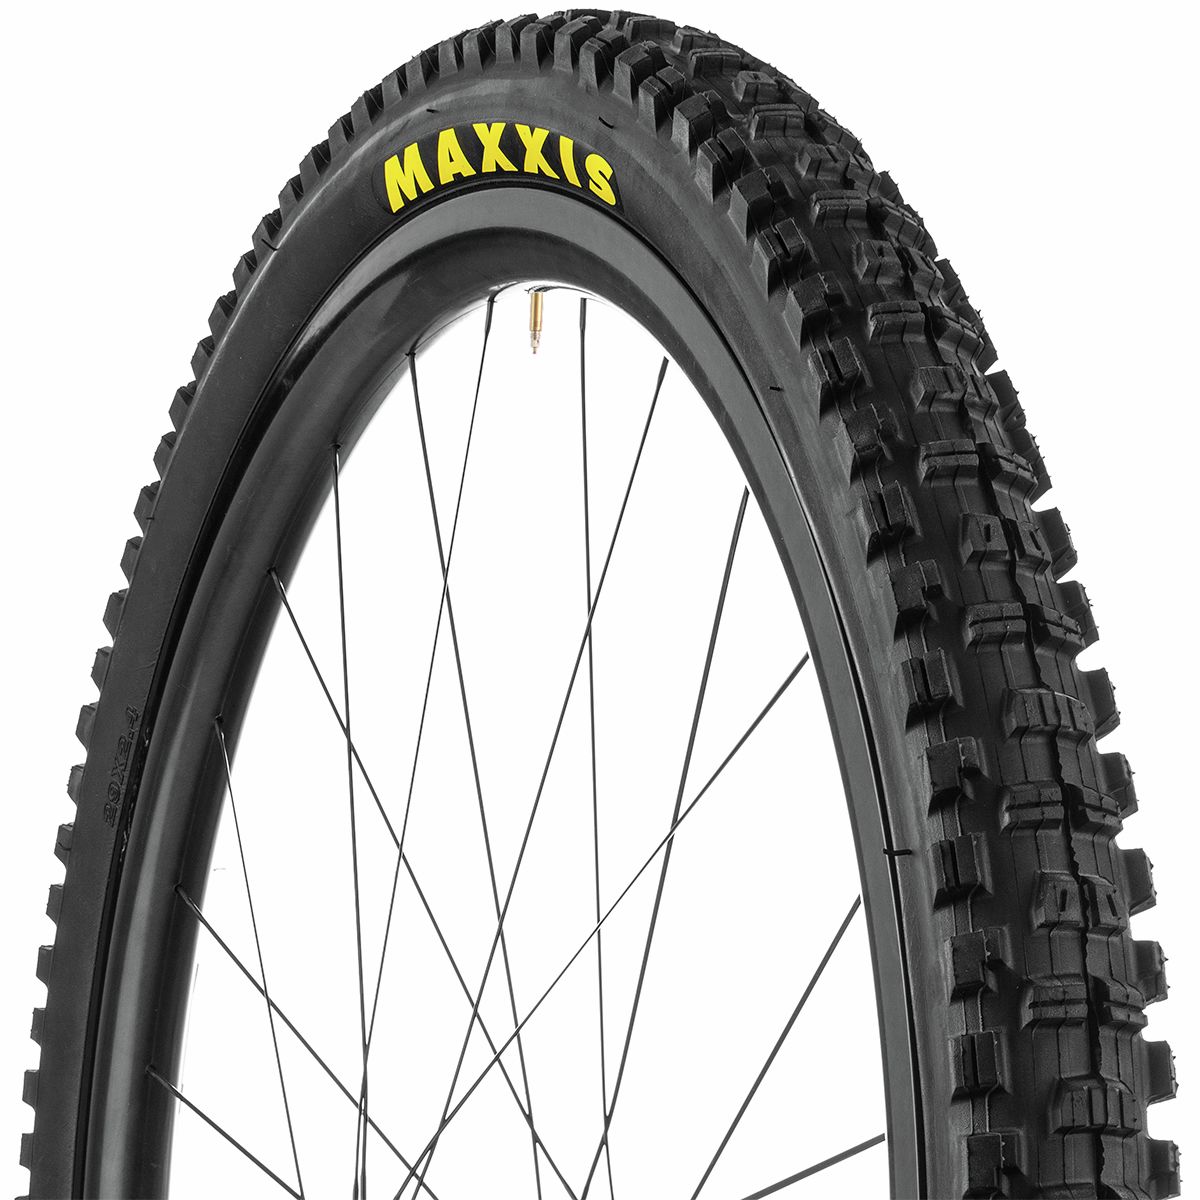 Maxxis Minion DHF Tire - Reviews, Comparisons, Specs - Tires